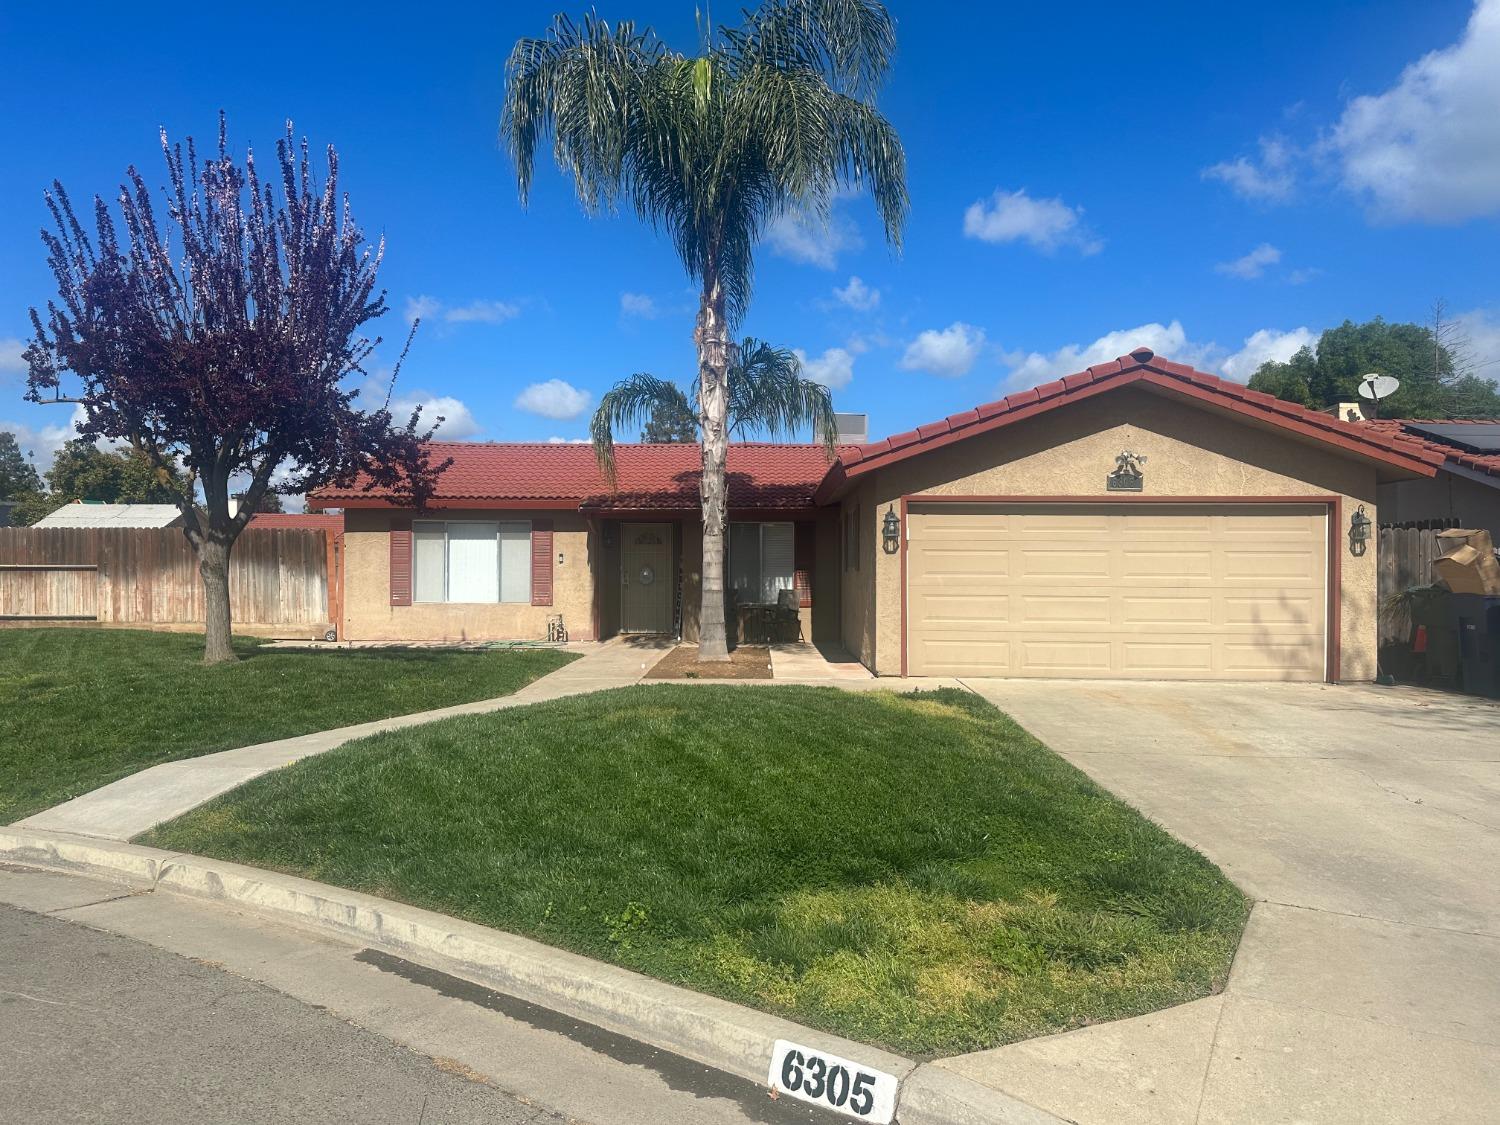 Photo of 6305 N State St in Fresno, CA